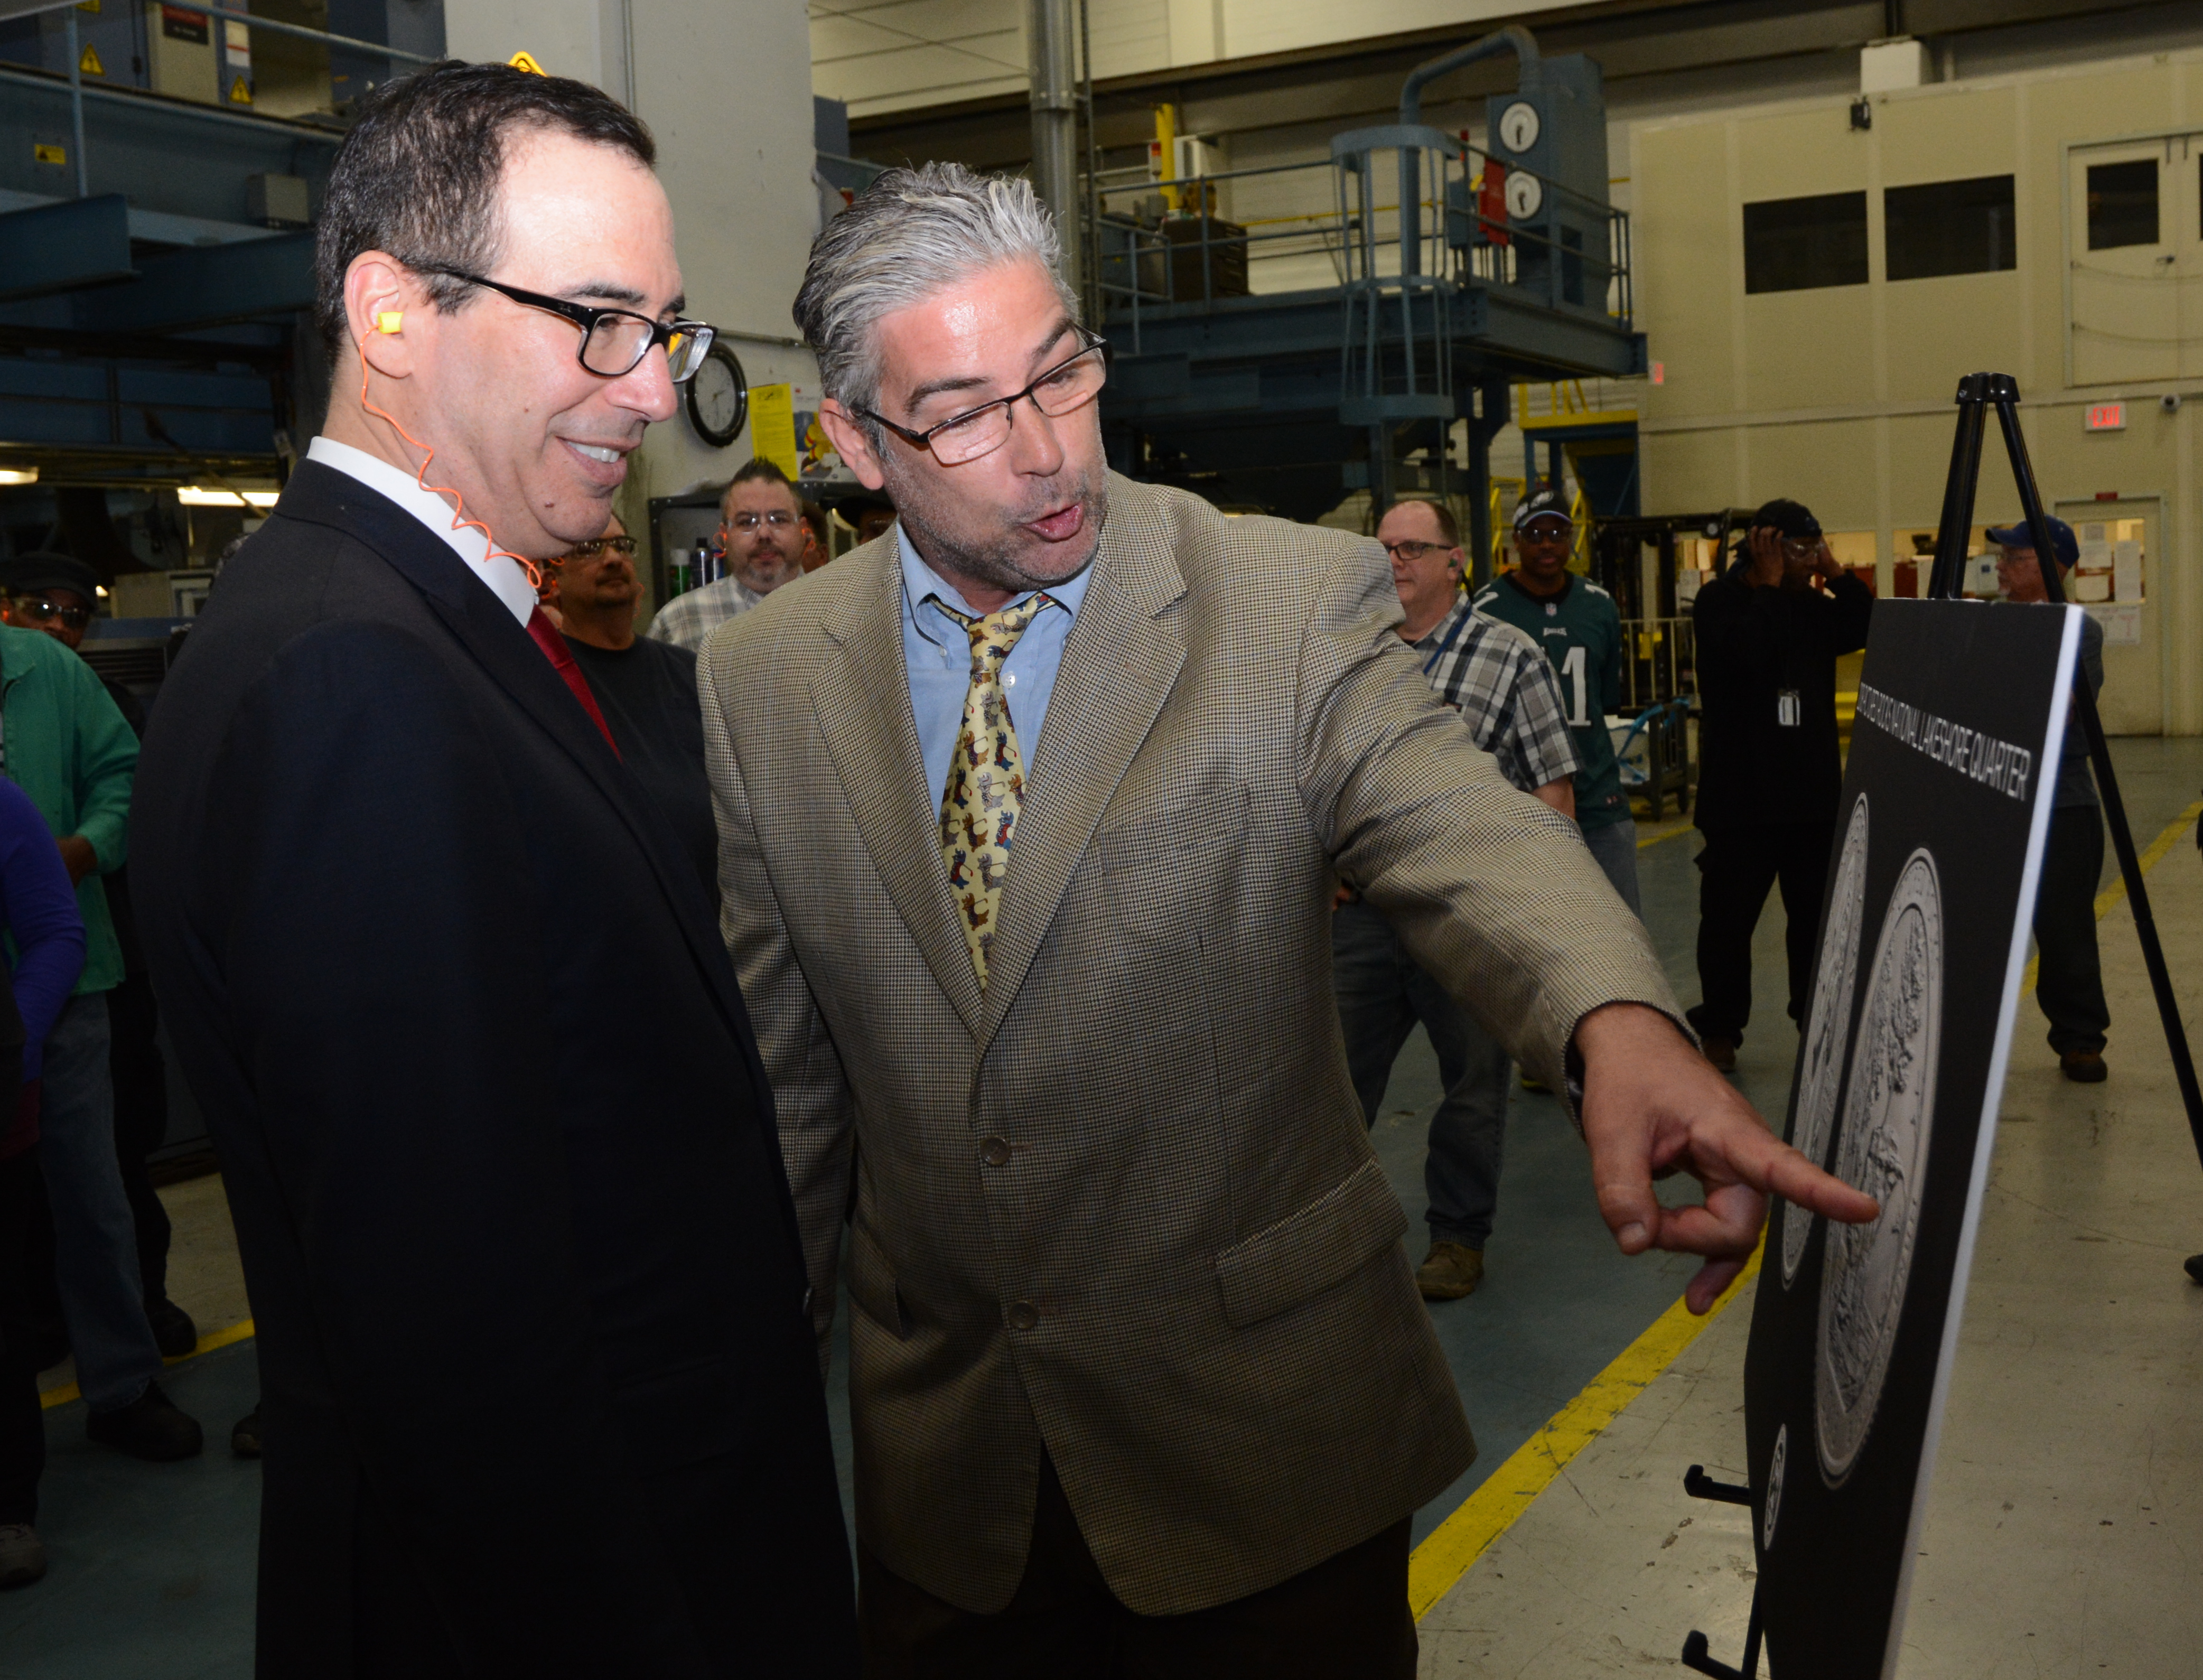 Michael Gaudioso, U.S. Mint Sculptor-Engraver of the Pictured Rocks National Lakeshore quarter, discusses his work on the coin with Treasury Secretary Steven Mnuchin during a tour of the circulating production area at the U.S. Mint facility in Philadelphi